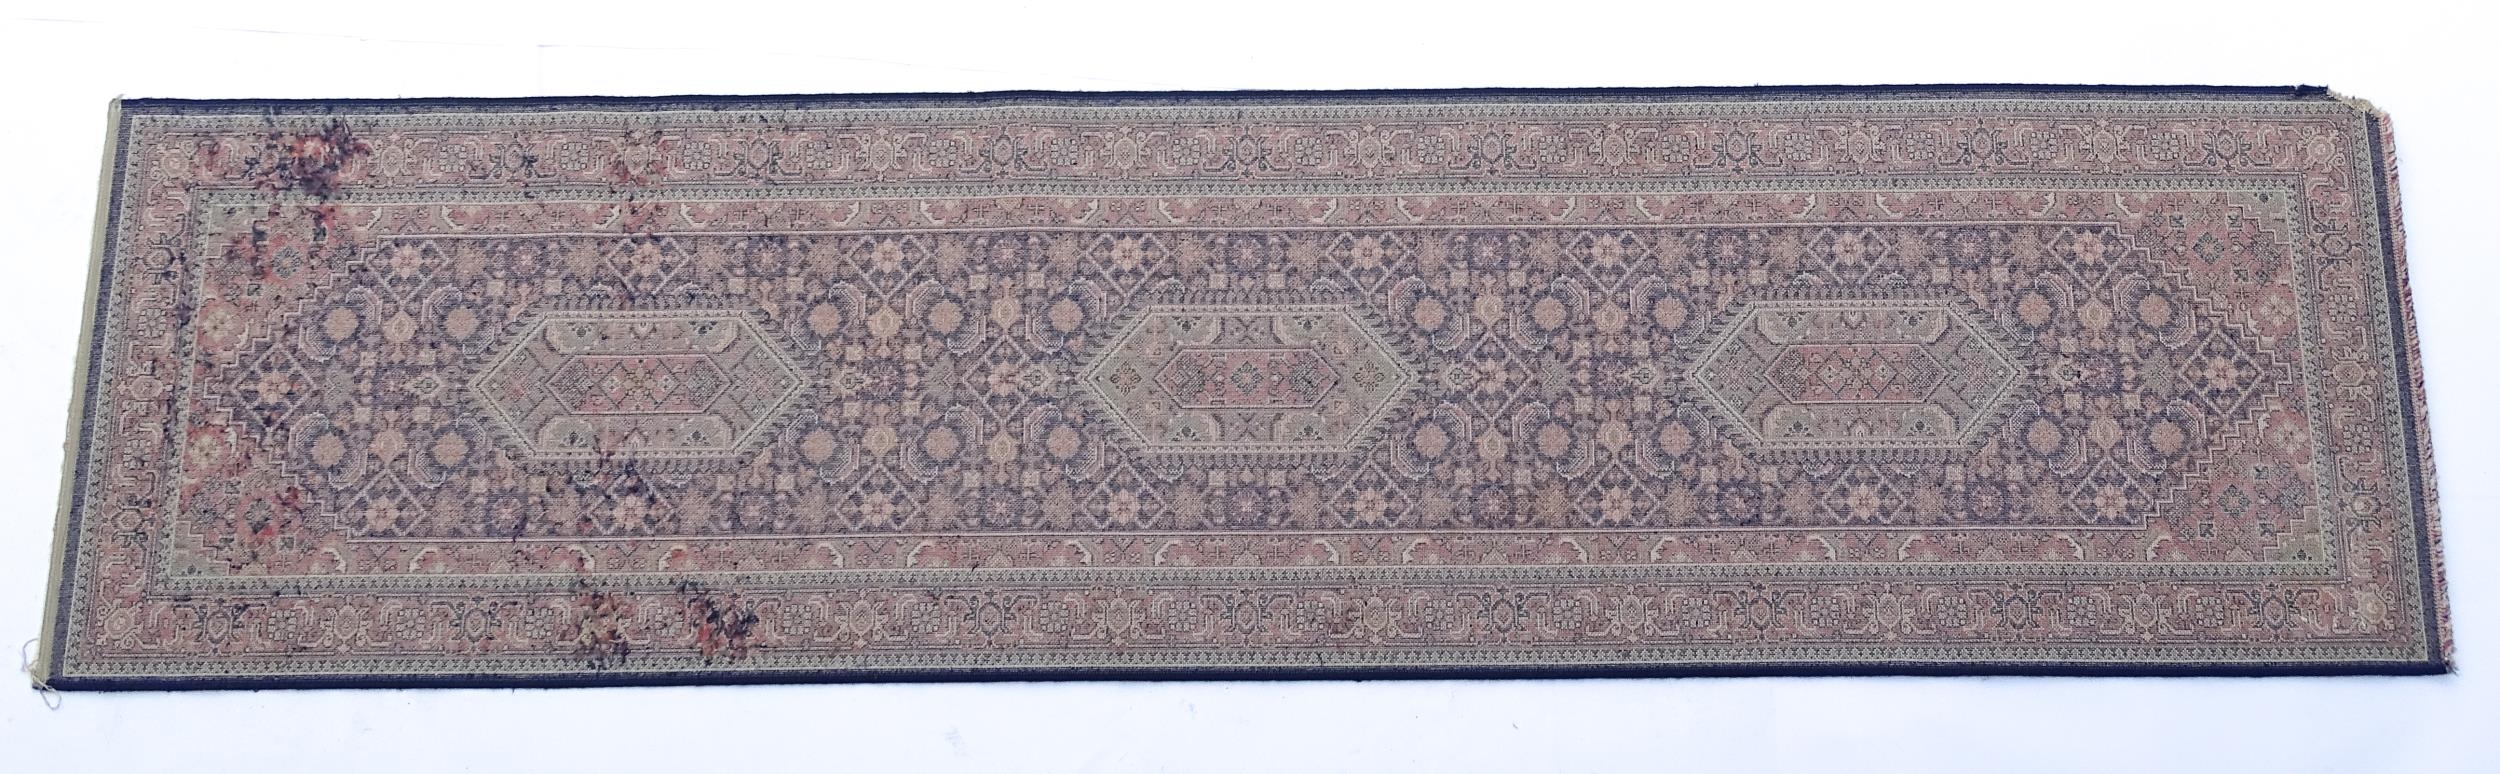 Carpet / Rug : A blue ground runner decorated with three central medallions with floral and scroll - Image 2 of 8